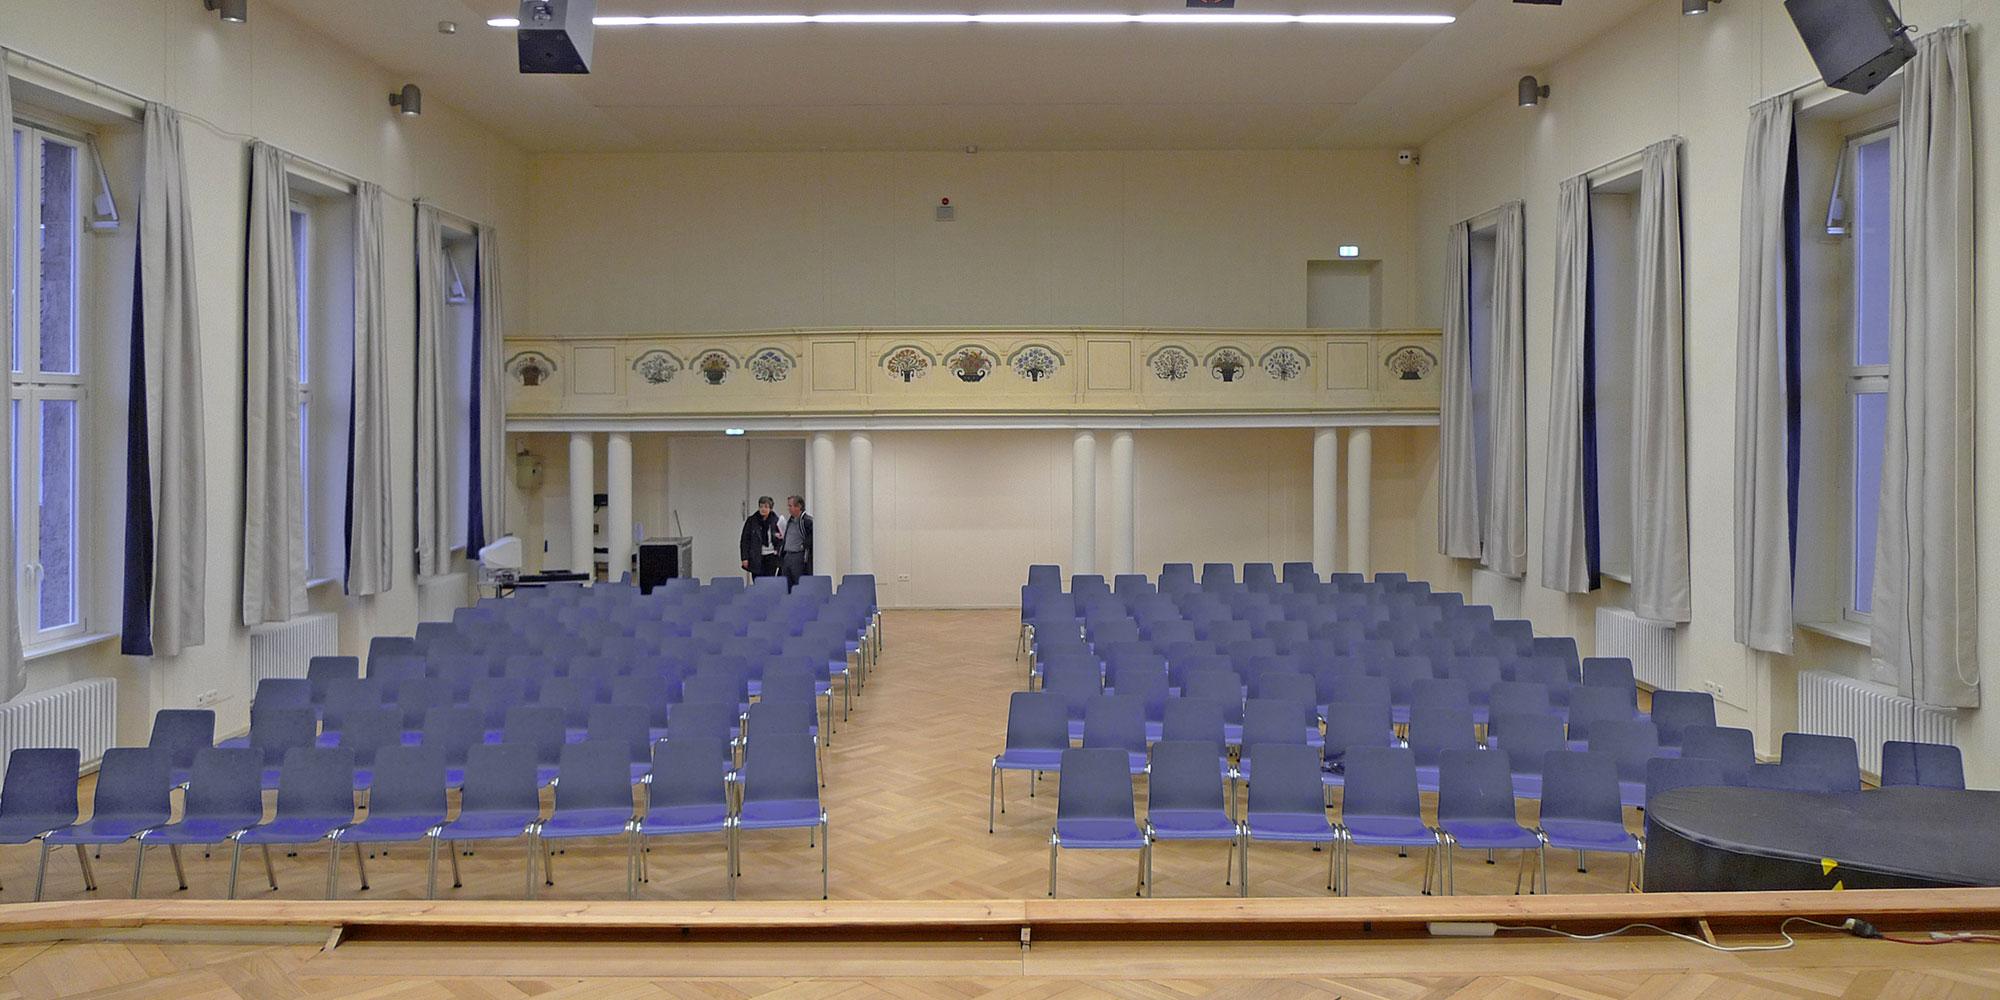 Restored assembly hall with row seating